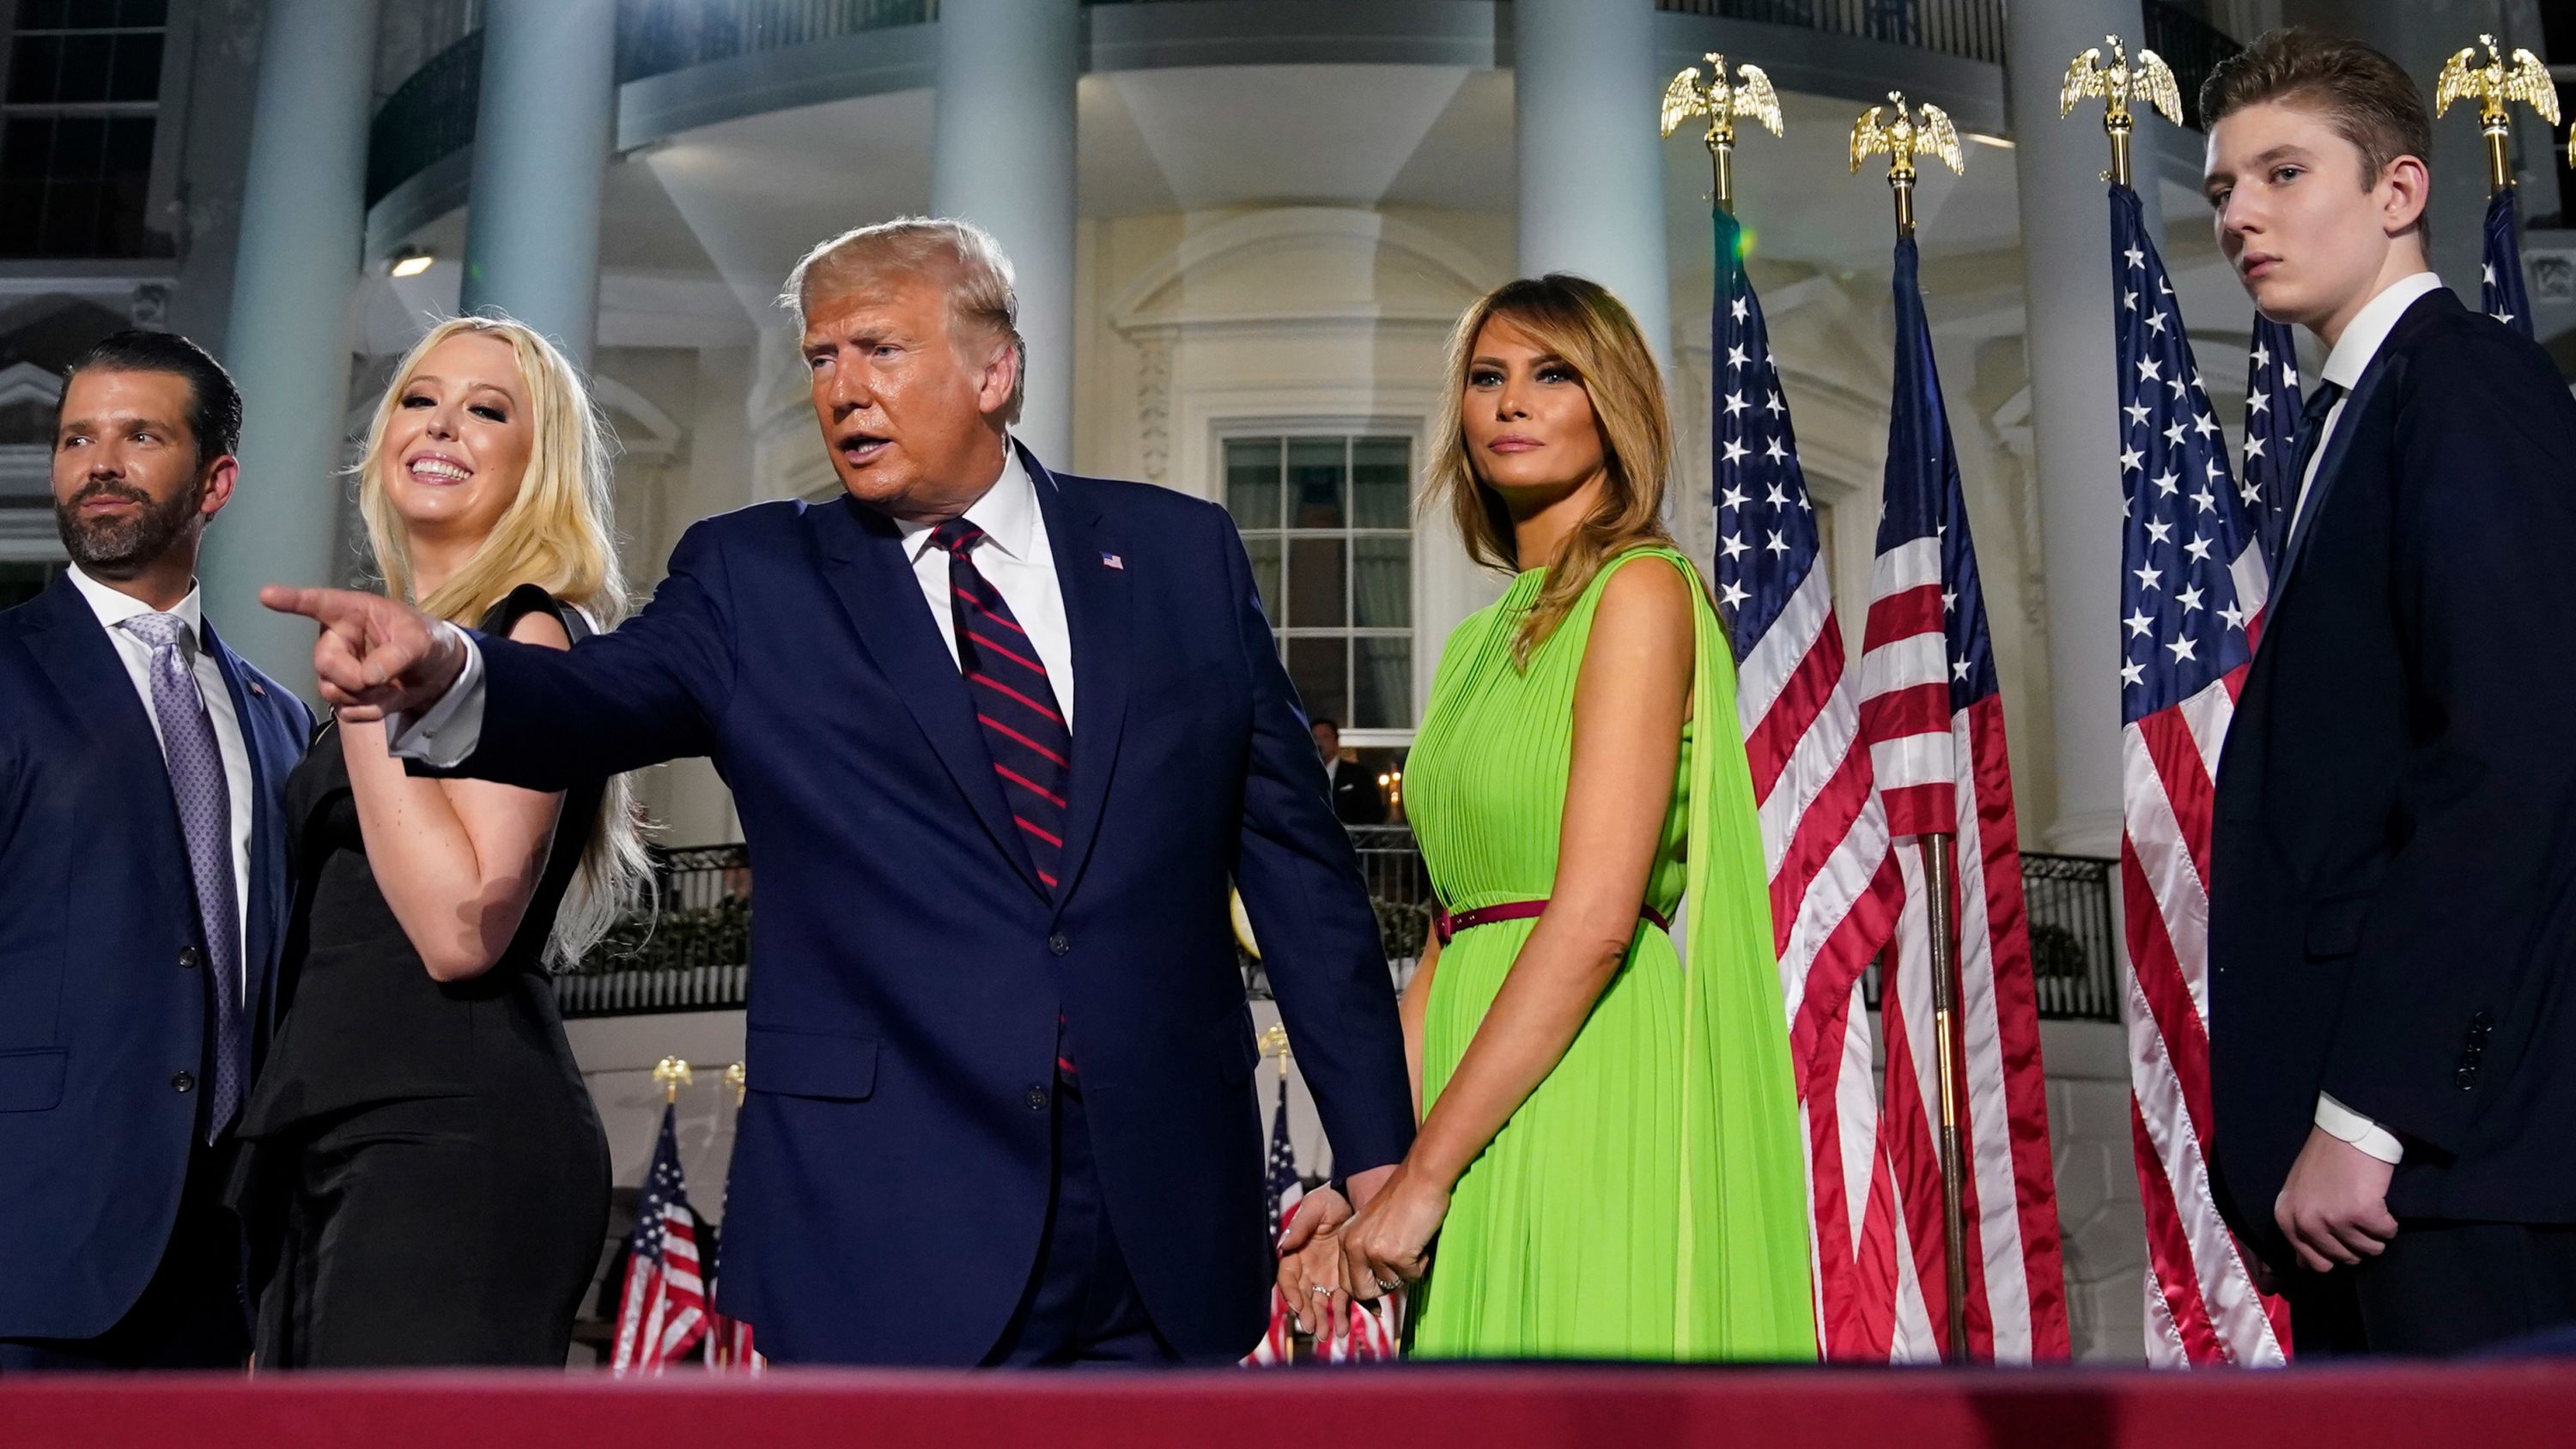 President Donald Trump is joined by first lady Melania Trump and three of his children — from left, Donald Jr., Tiffany and Barron — after his nomination acceptance speech on Thursday, August 27.